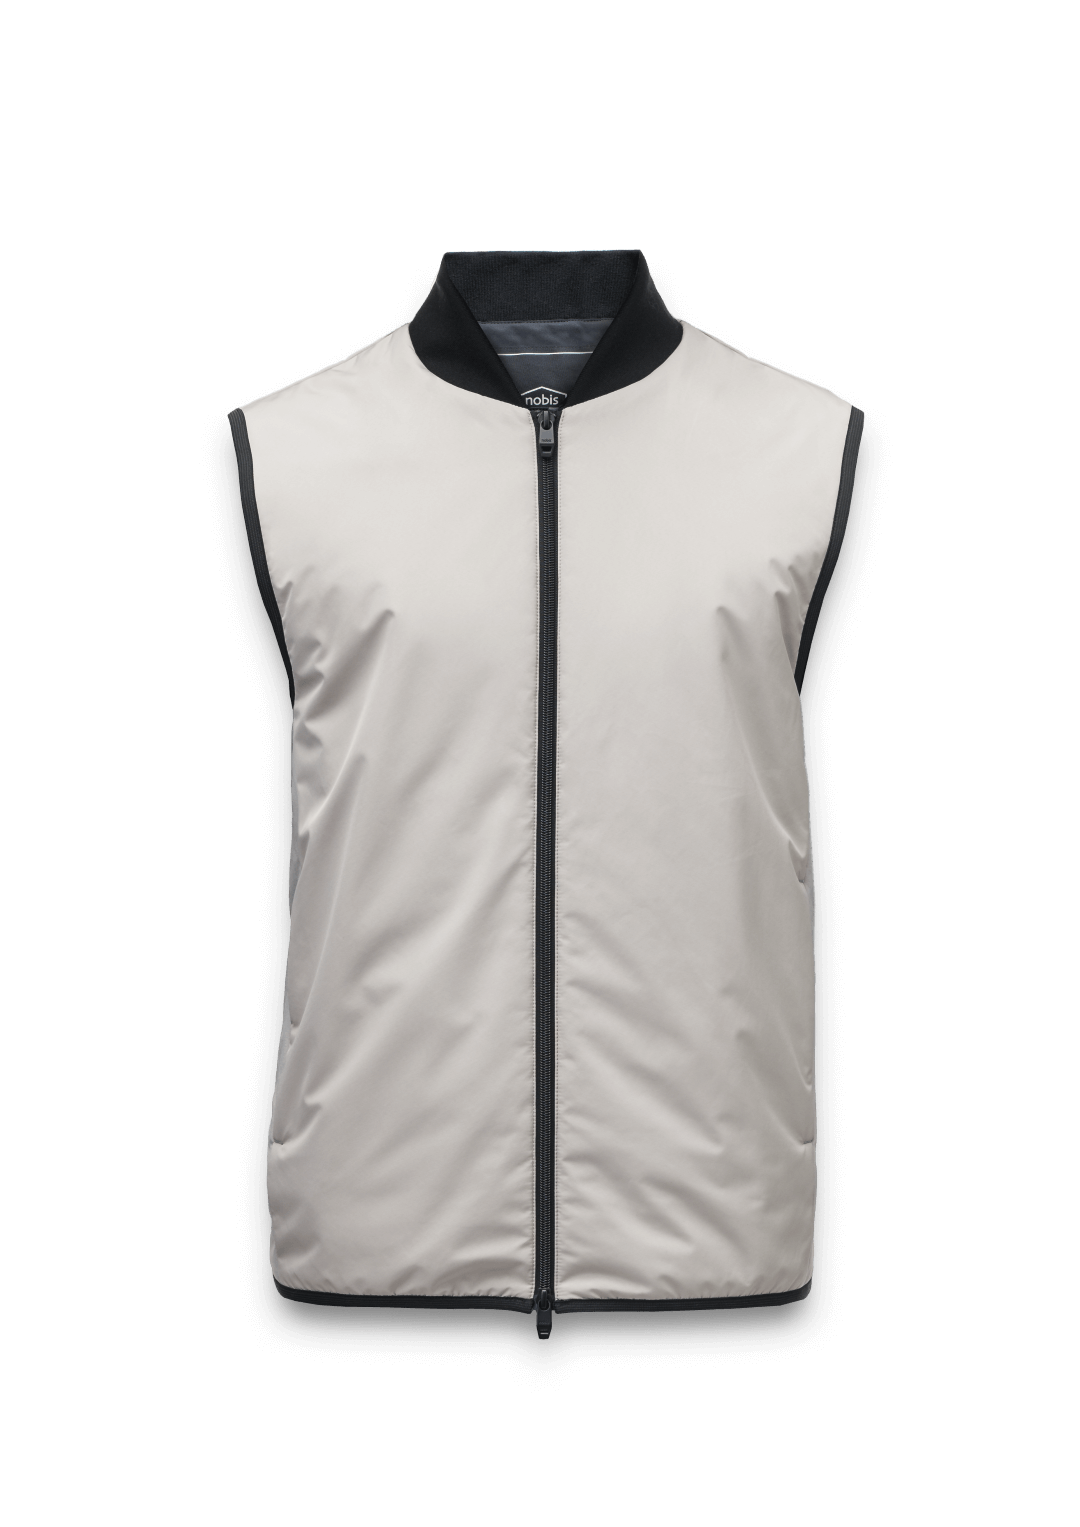 Neo Men's Mid Layer Vest in hip length, Primaloft Gold Insulation Active+, and two-way zipper, in Clay